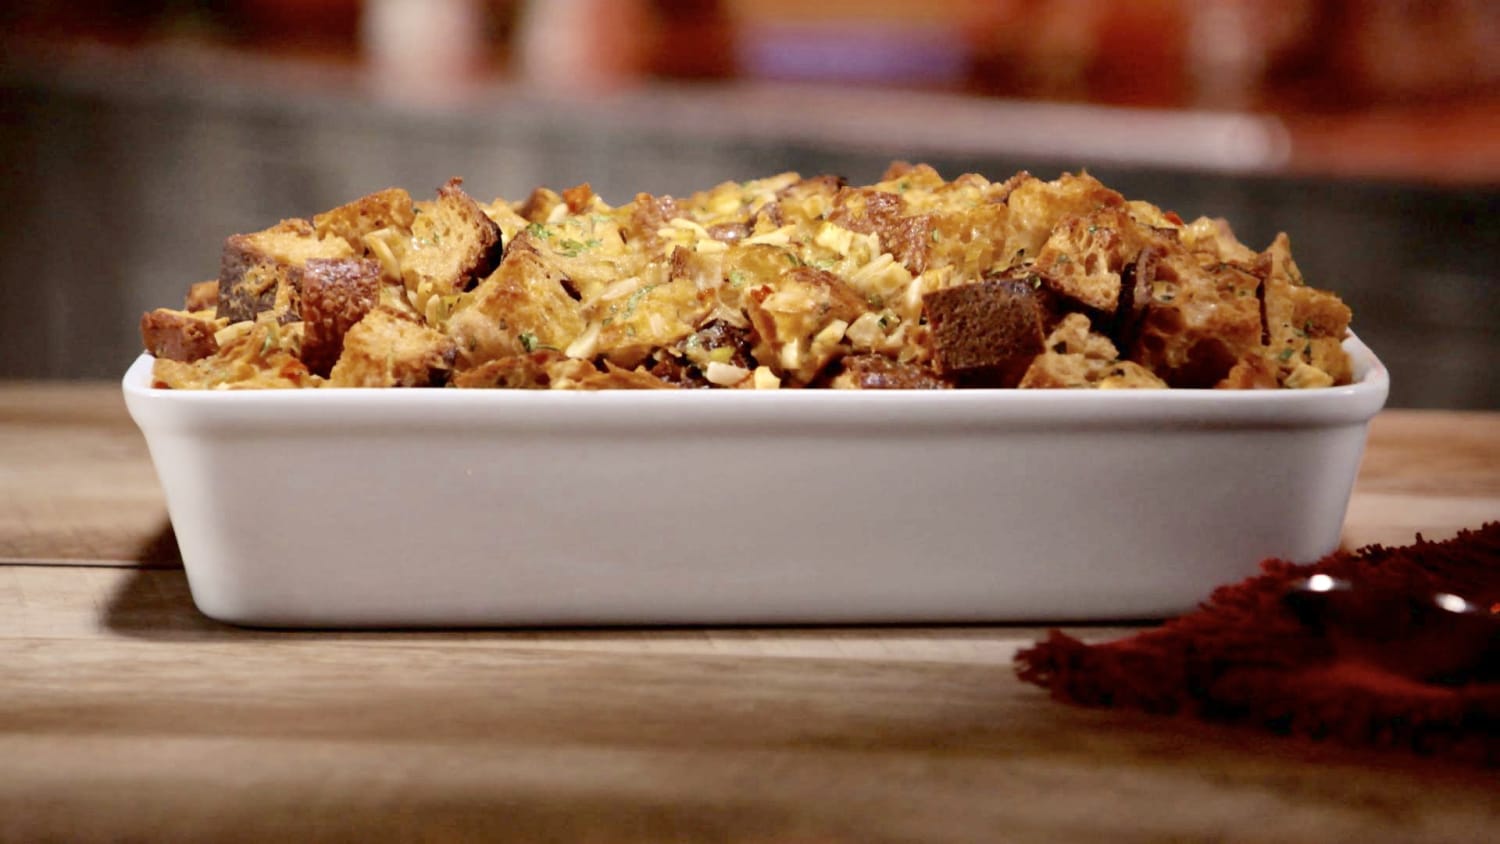 Make savory Thanksgiving stuffing with sourdough and challah